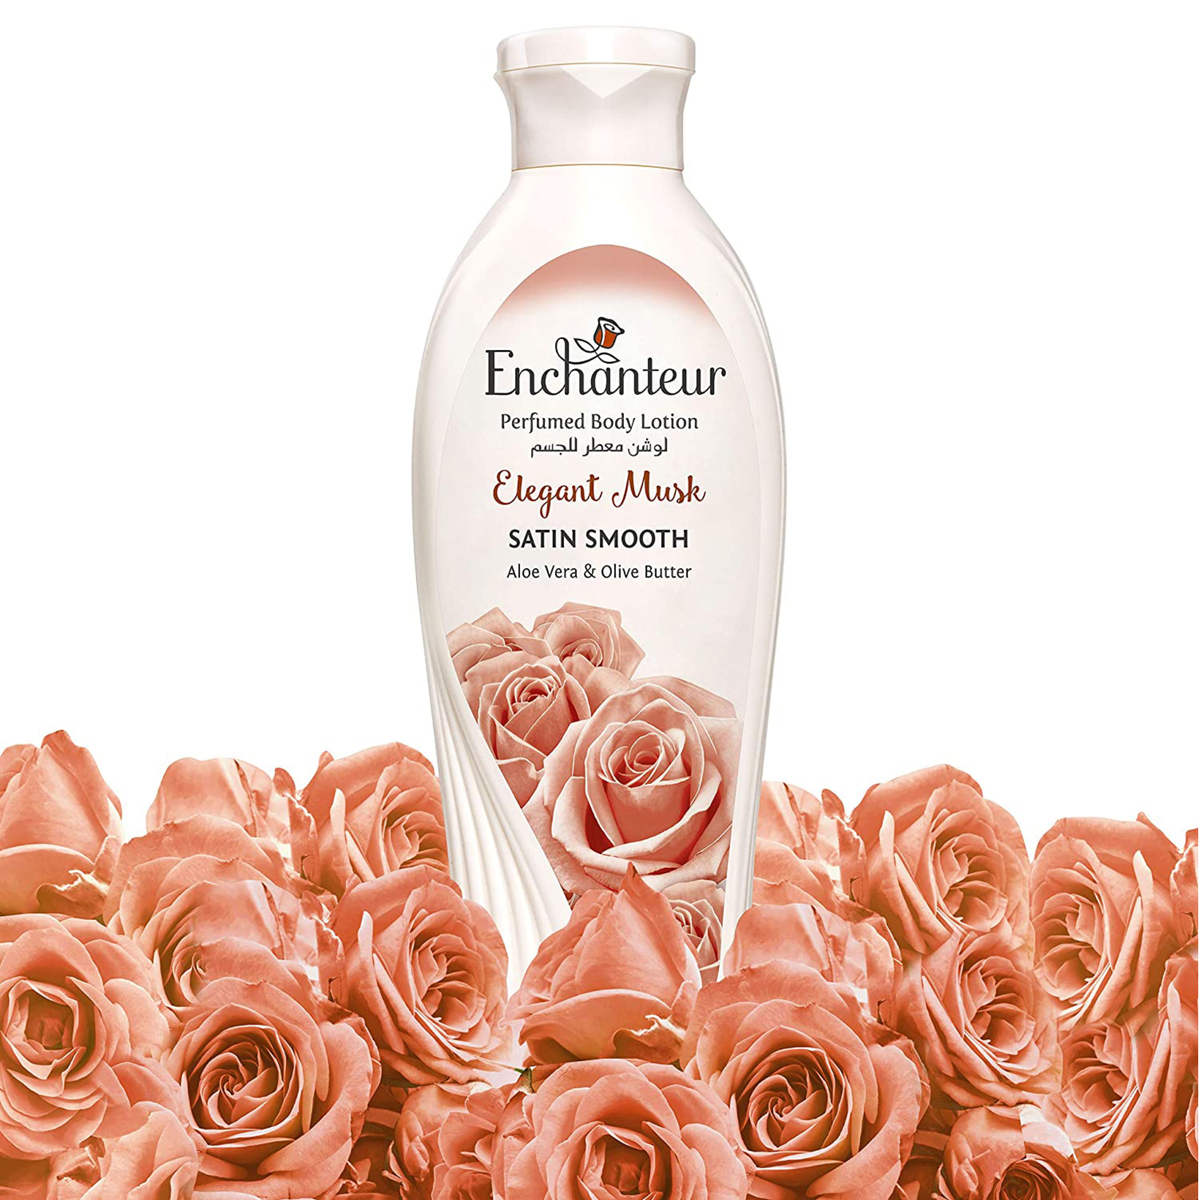 Enchanteur Satin Smooth Elegant Musk Lotion with Aloe Vera & Olive Butter 250ml